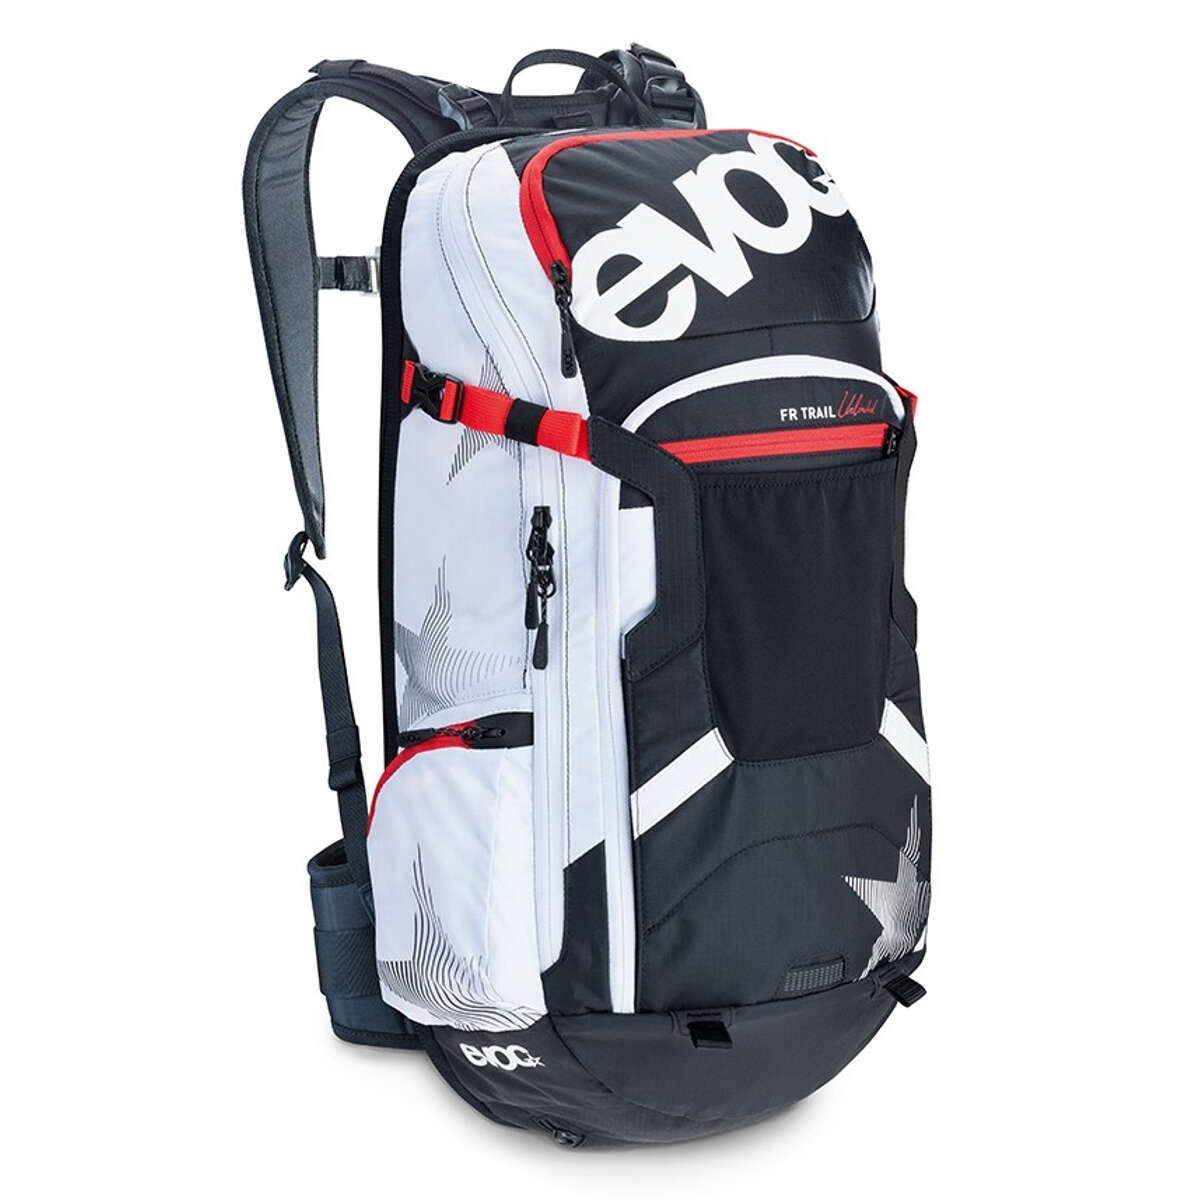 Evoc Protector Backpack with Hydration System Compartment FR Trail Unlimited Team - Black/White, 20 Liter